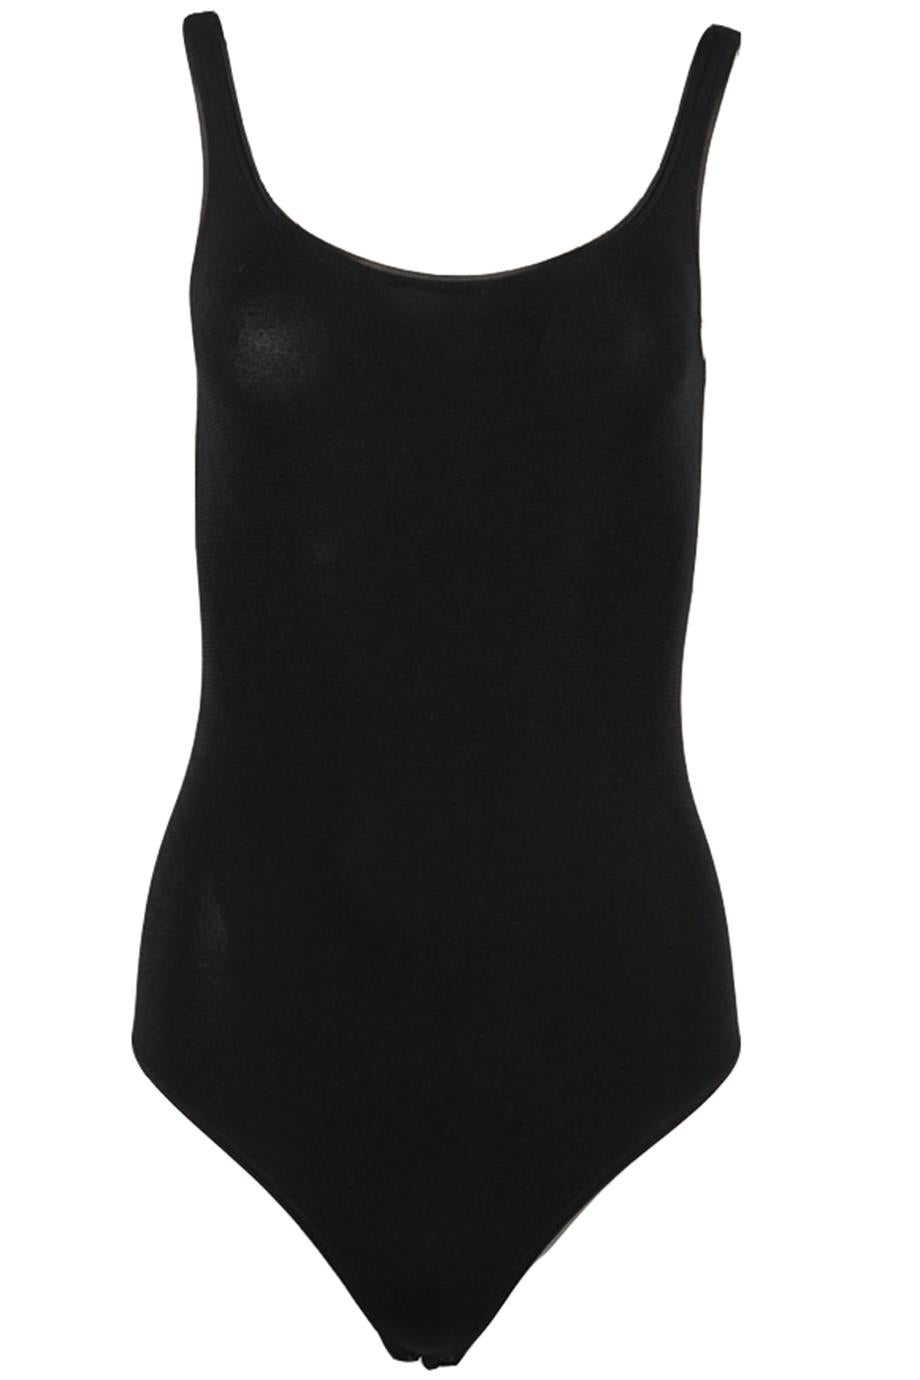 WOLFORD JERSEY BODYSUIT SMALL